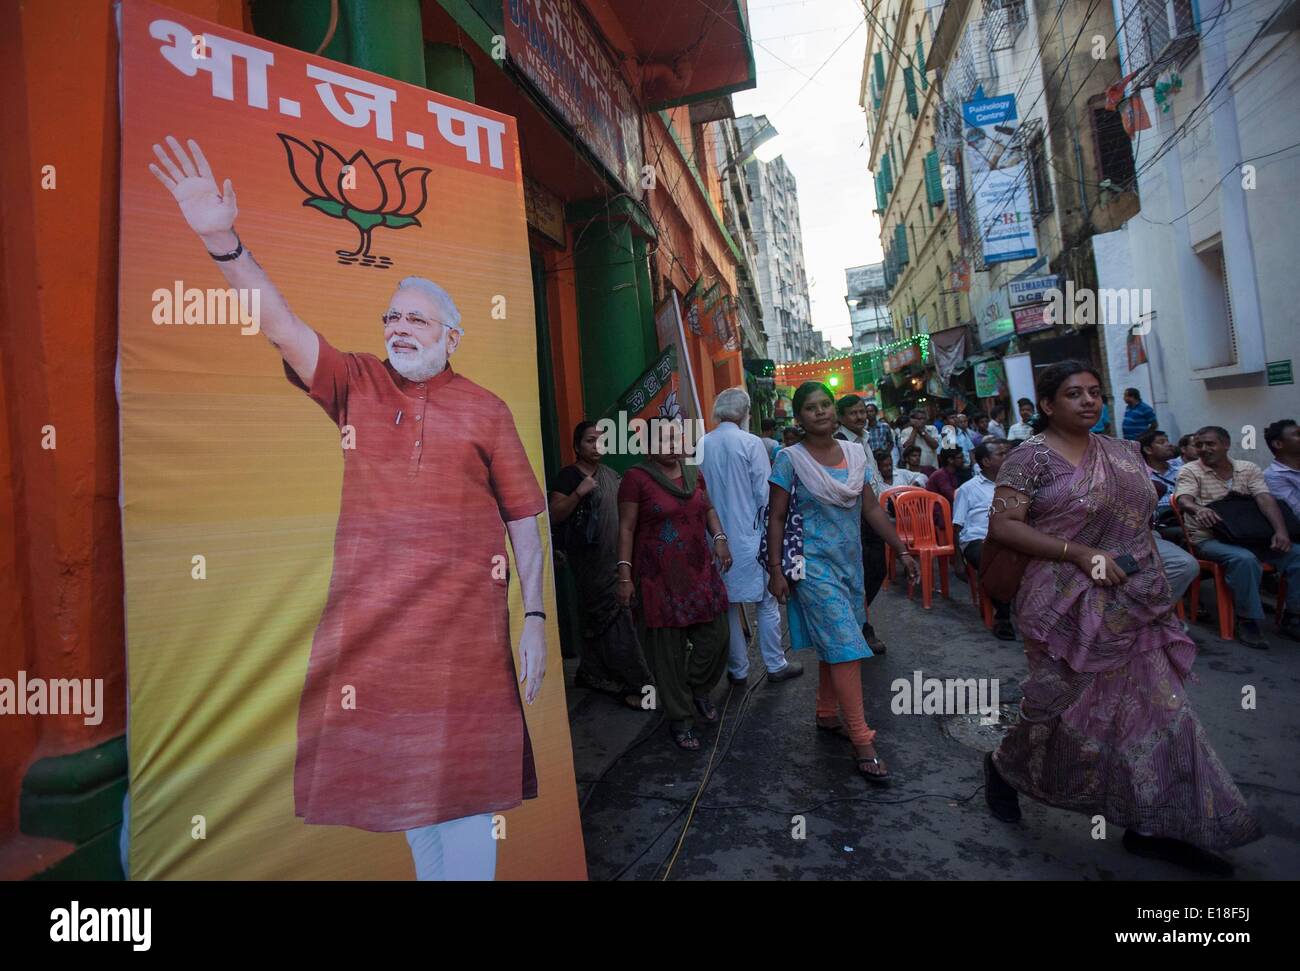 Calcutta, Indian state West Bengal. 26th May, 2014. Supporters of Indian Bharatiya Janata Party (BJP) gather to watch the oath taking ceremony of Narendra Modi as India's 15th prime minister in Calcutta, capital of eastern Indian state West Bengal, May 26, 2014. Narendra Modi, the son of a tea-seller, on Monday created history by becoming Indian new prime minister in a grand ceremony attended by his counterpart from arch- rival Pakistan, along with heads of state of other South Asian nations. Credit:  Tumpa Mondal/Xinhua/Alamy Live News Stock Photo